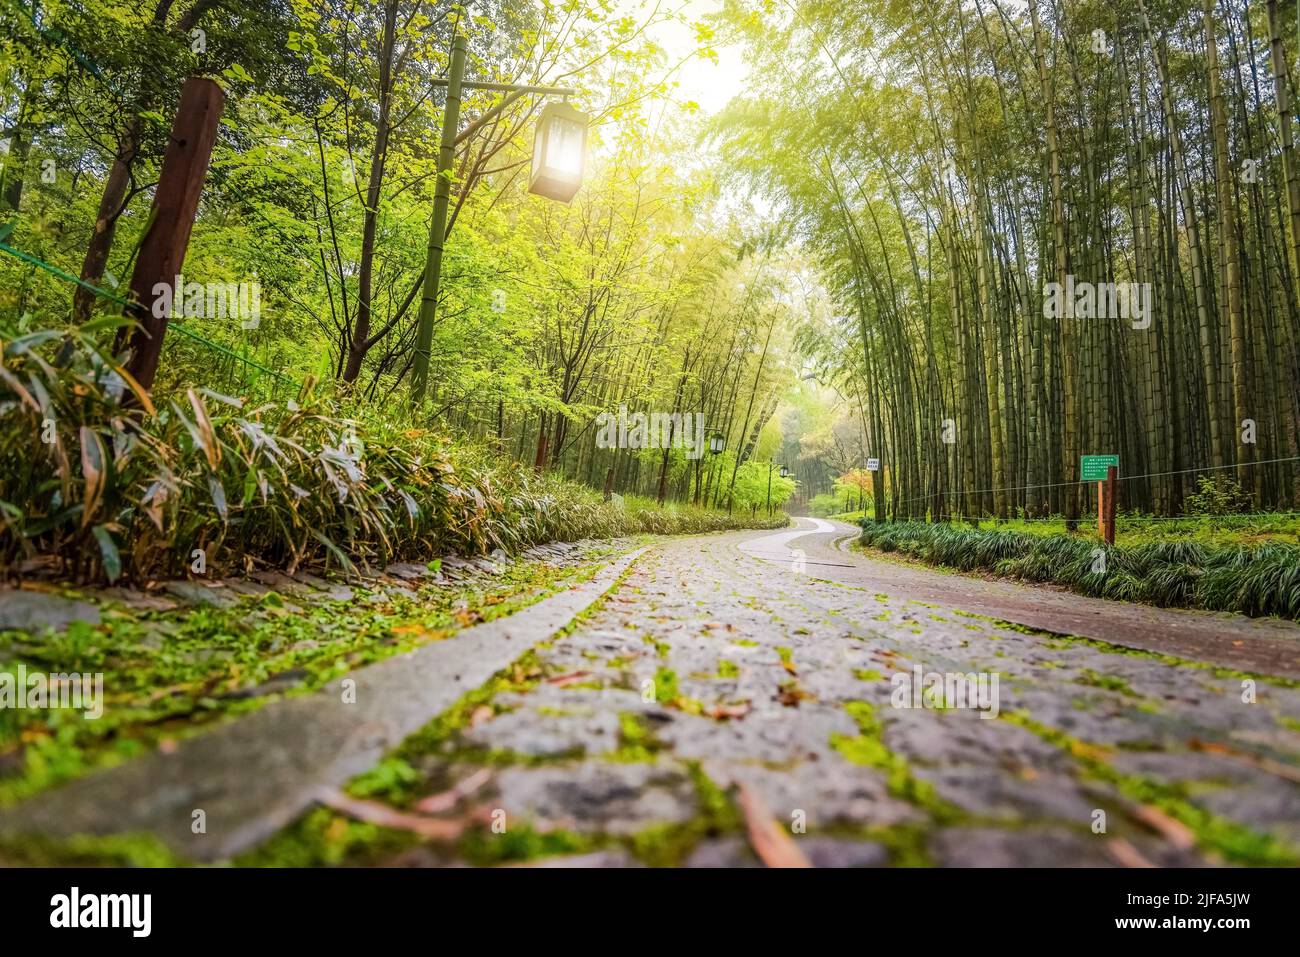 A path in china with bamboo trees, a path in a tourist park in china (Picea) Schrenkiana Forest Stock Photo